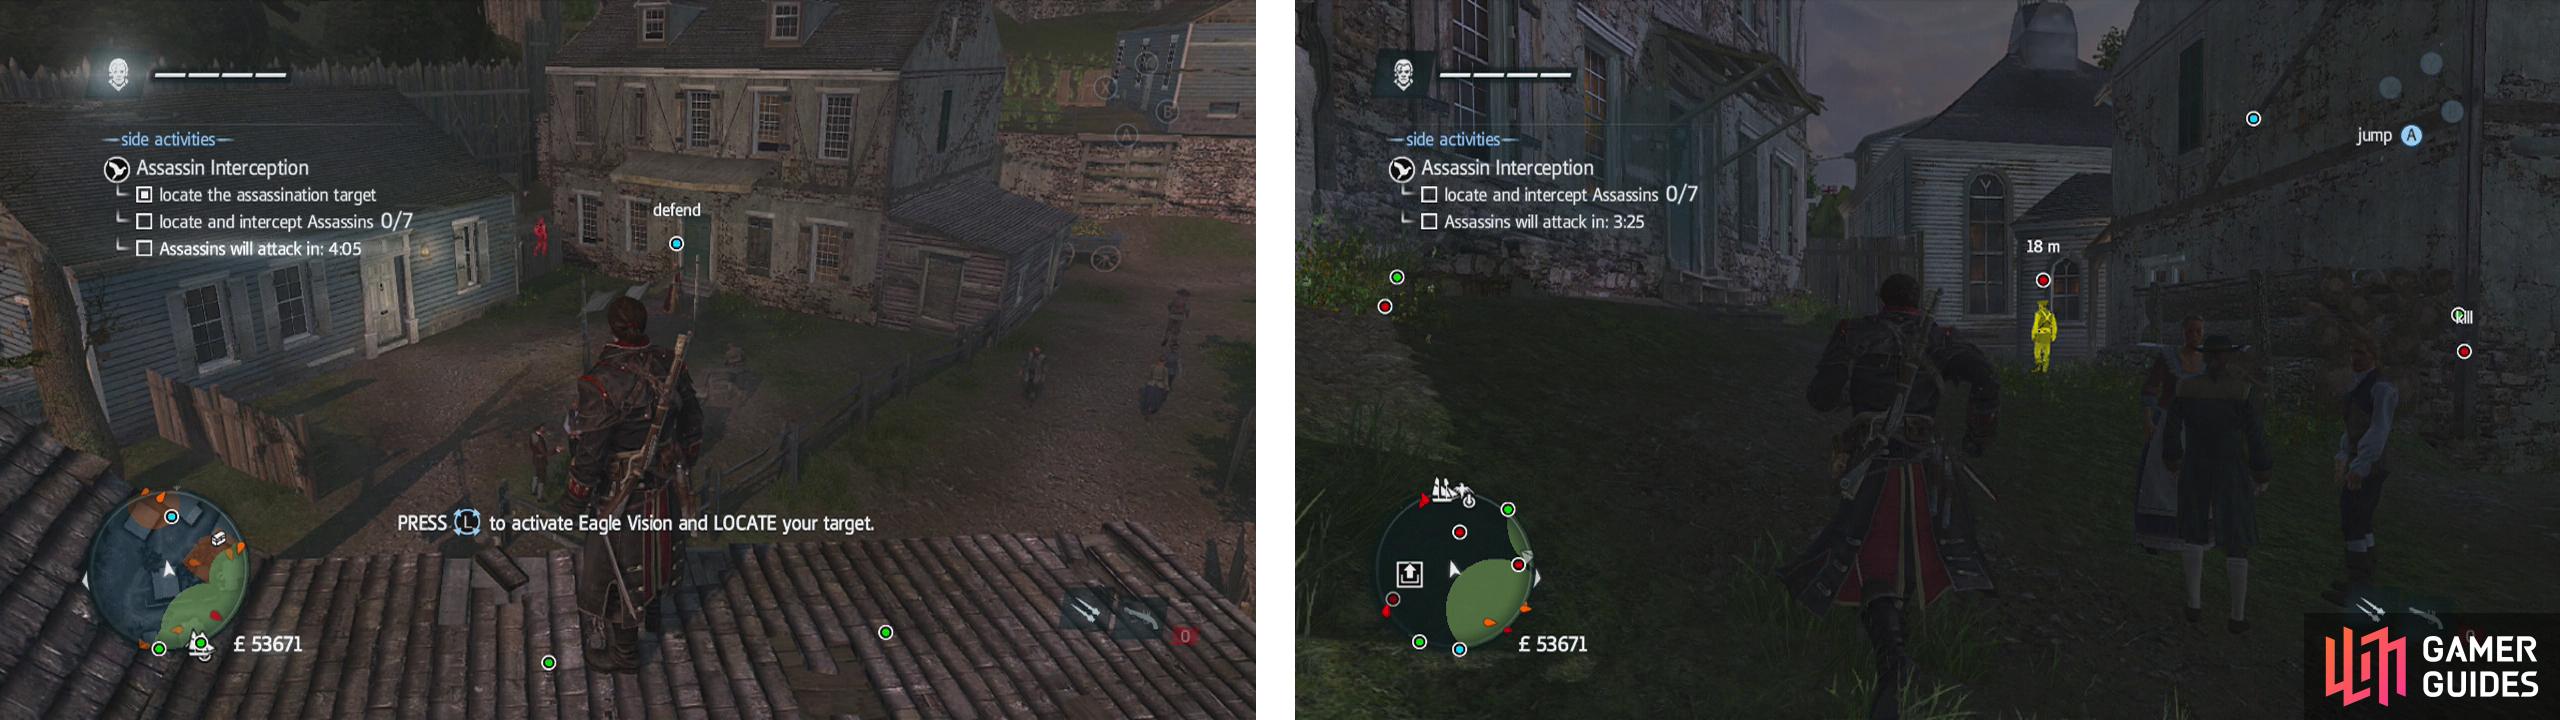 You can find the target in a fenced yard area (left), several of the assassins are hanging out around the viewpoint (right).